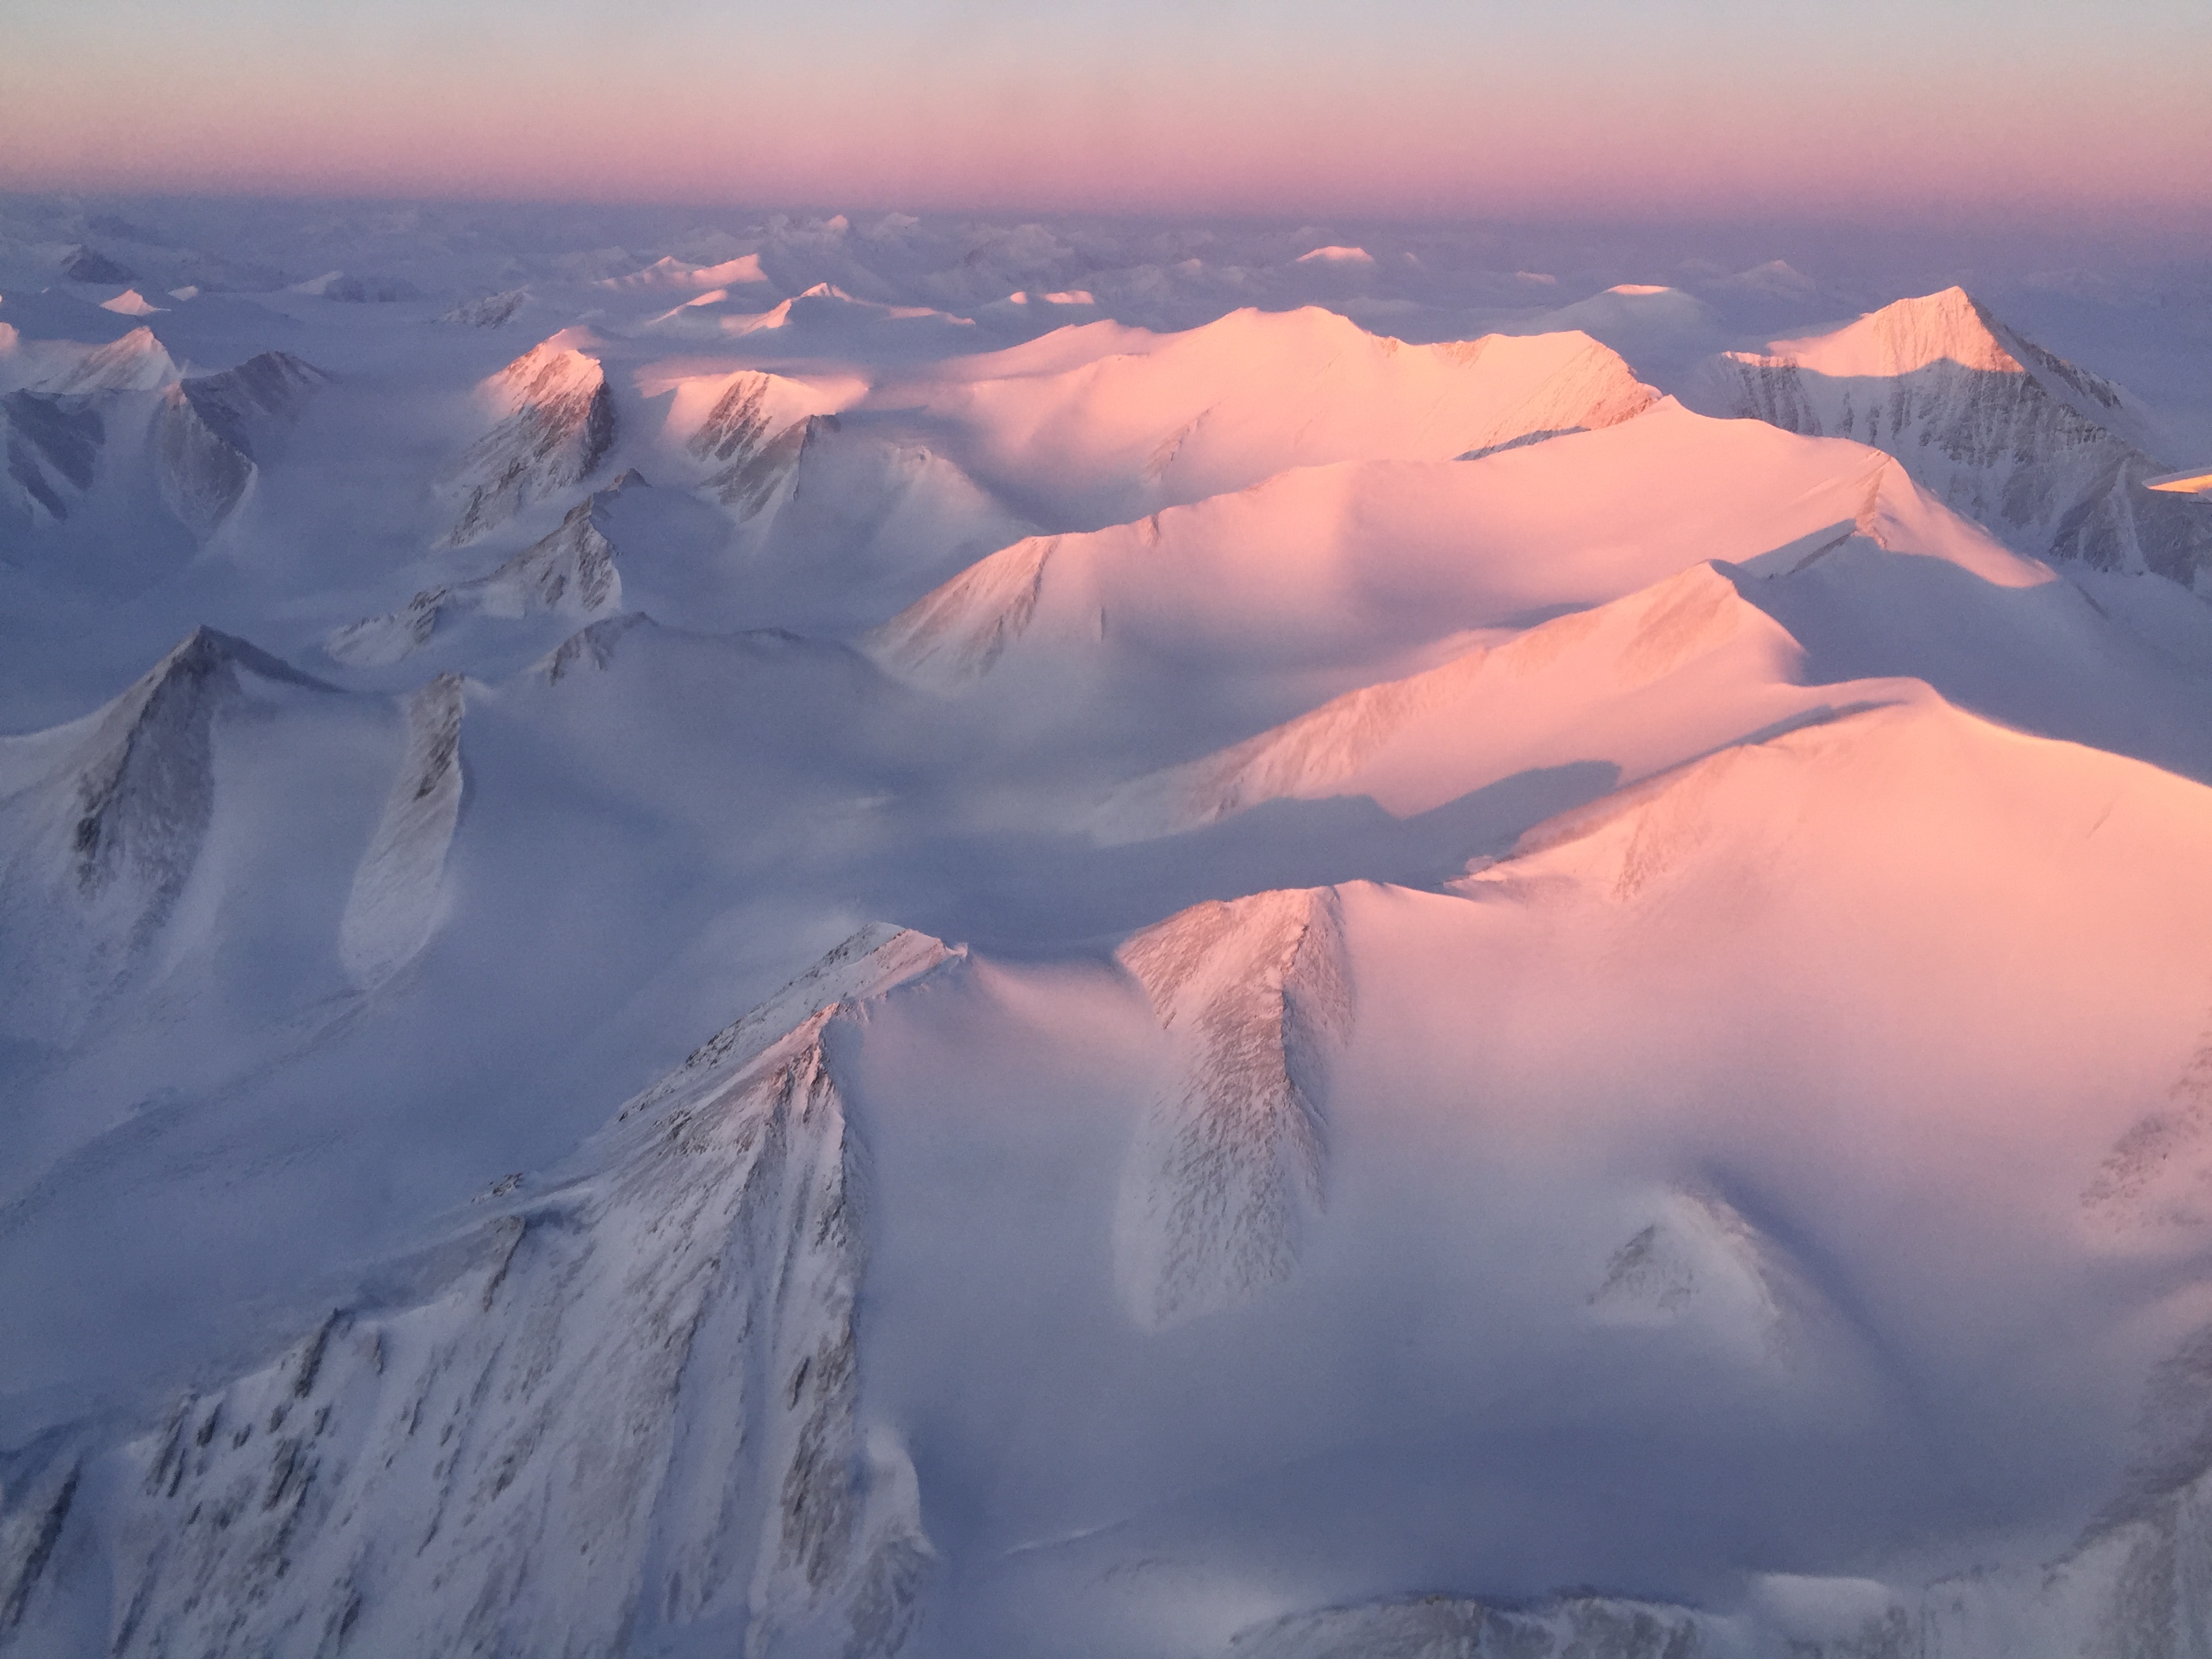 Ellesmere Island mountain tops bathed in light as the sun began to peak over the horizon during Operation IceBridge’s first flight of its 2017 Arctic campaign, on March 9, 2017. (Nathan Kurtz / NASA)